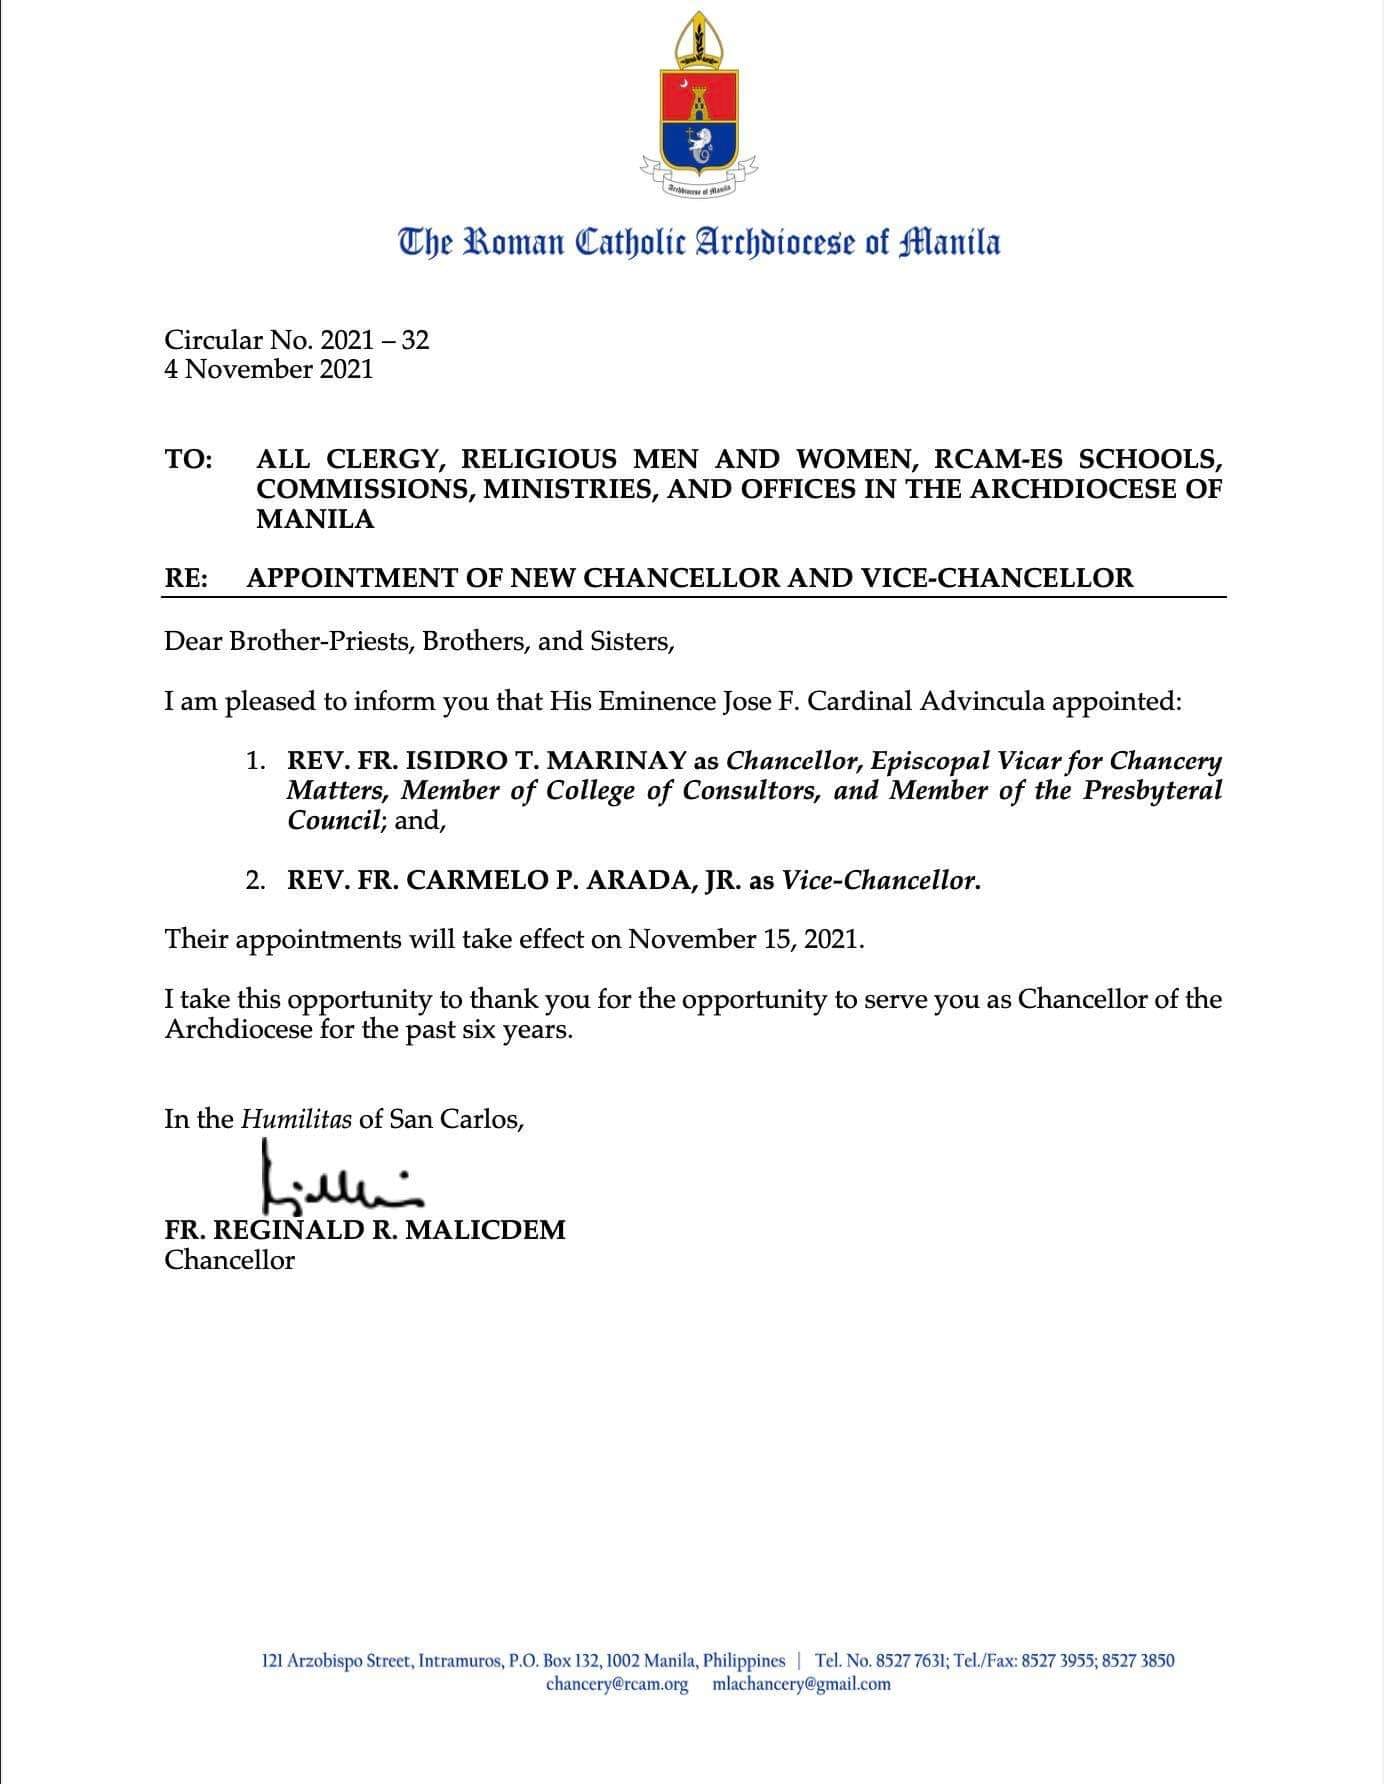 The Archdiocese of Manila on Thursday announced that it has named its new chancellor and vice chancellor.